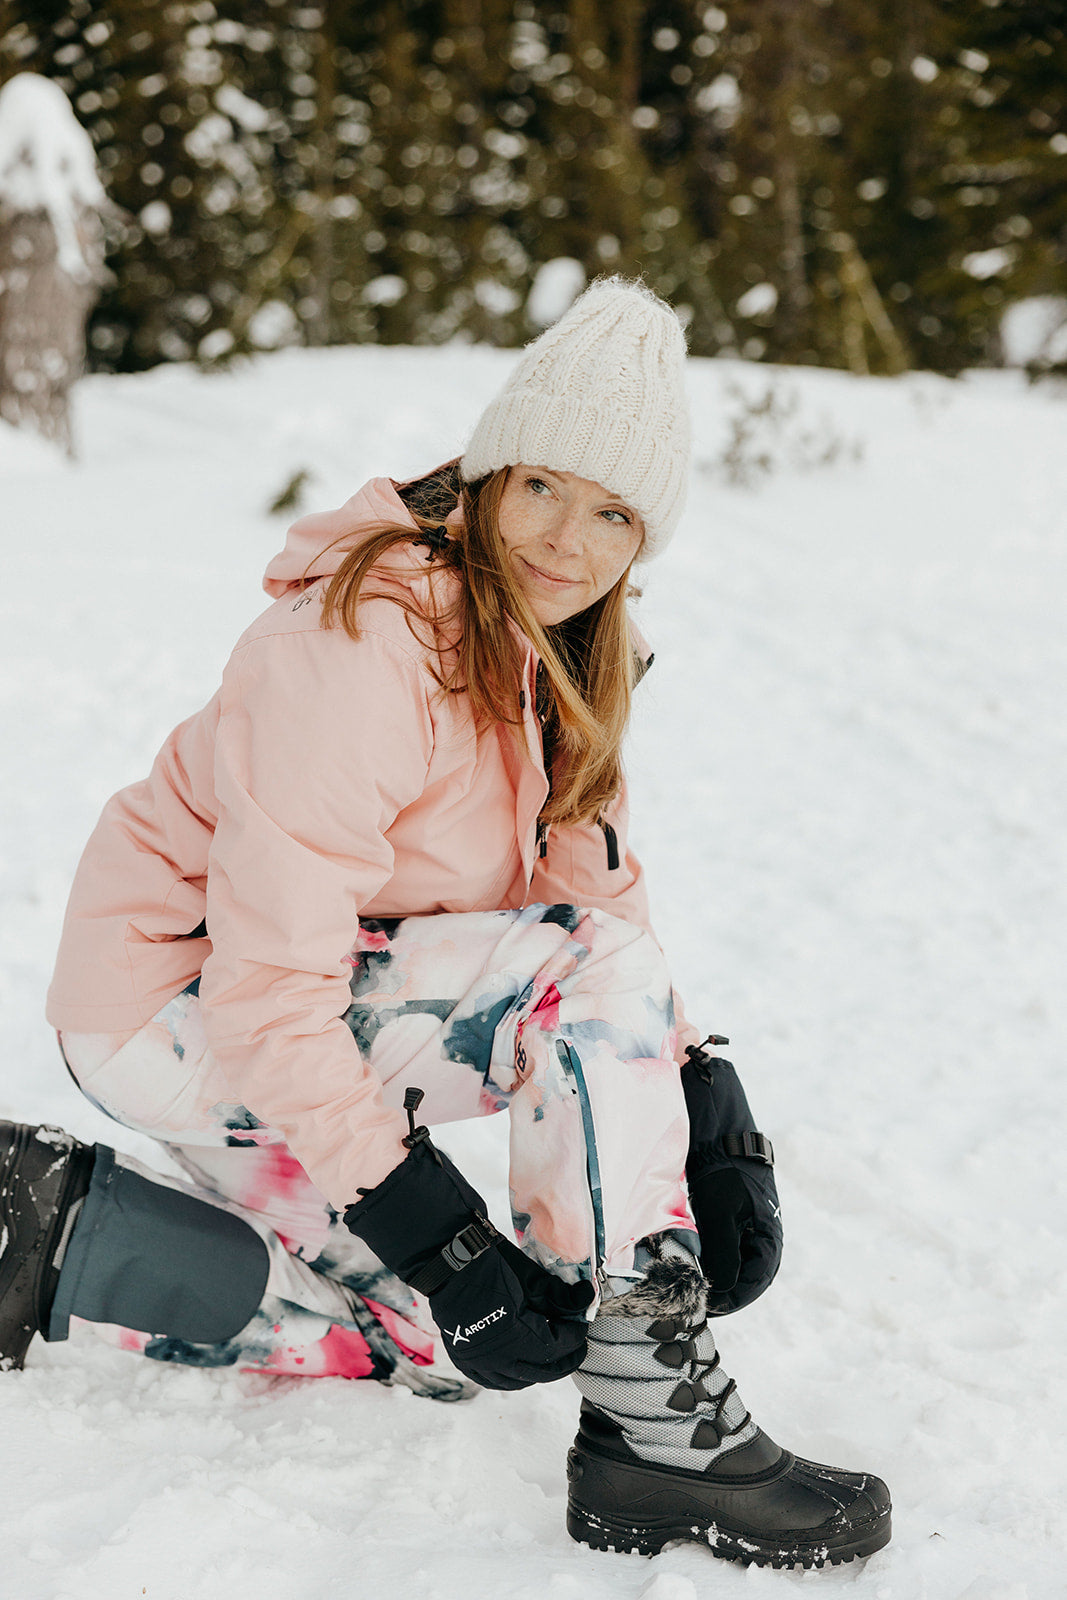 Shop Arctix women's jackets, bibs and boots for all your adventures.